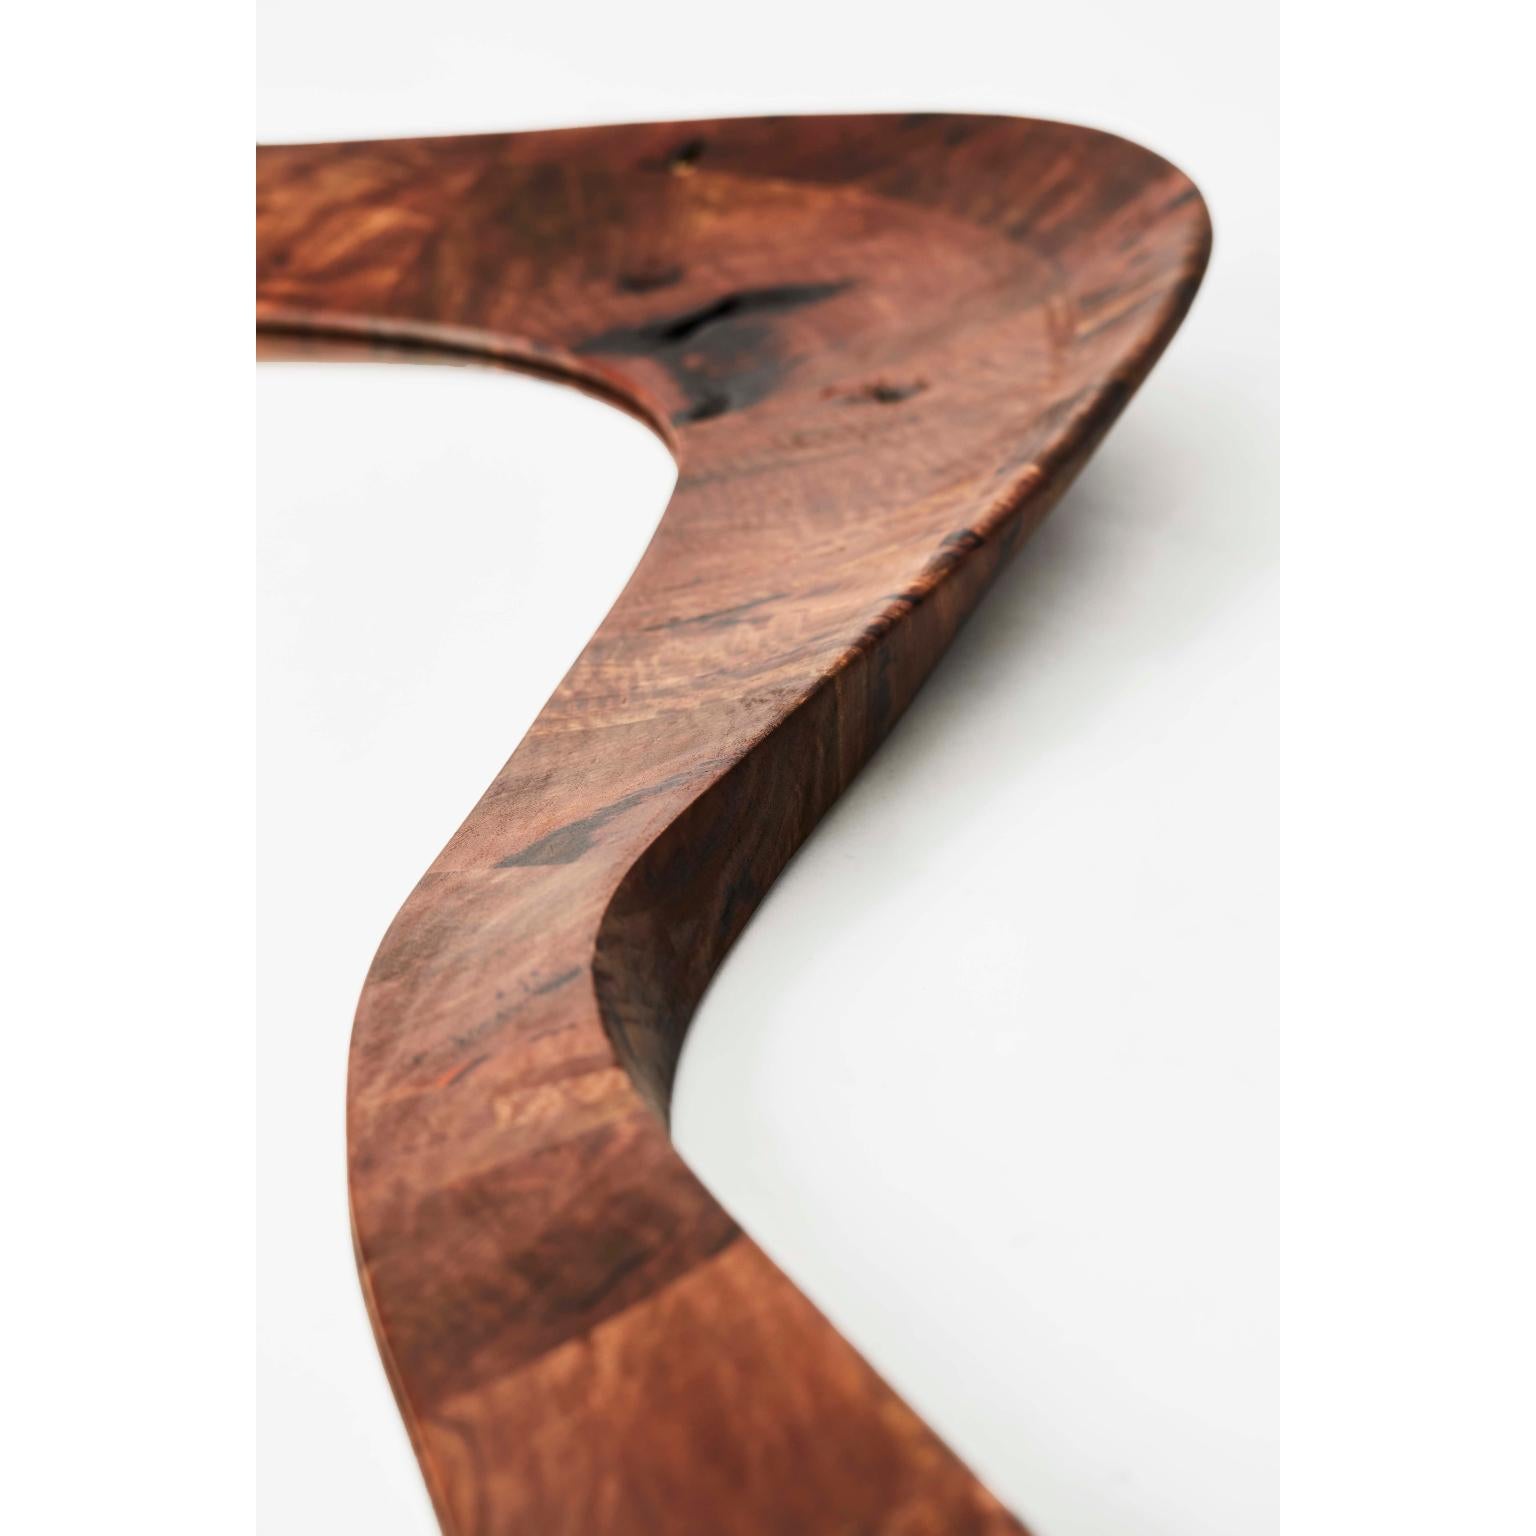 Unique handmade walnut portal mirror by Maxime Goléo
Unique piece
Dimensions: W 92x D 10 x H 145 cm
Materials: French walnut

Each piece is unique, handmade, signed and dated.
Other dimensions and types of wood on request.

Designer,